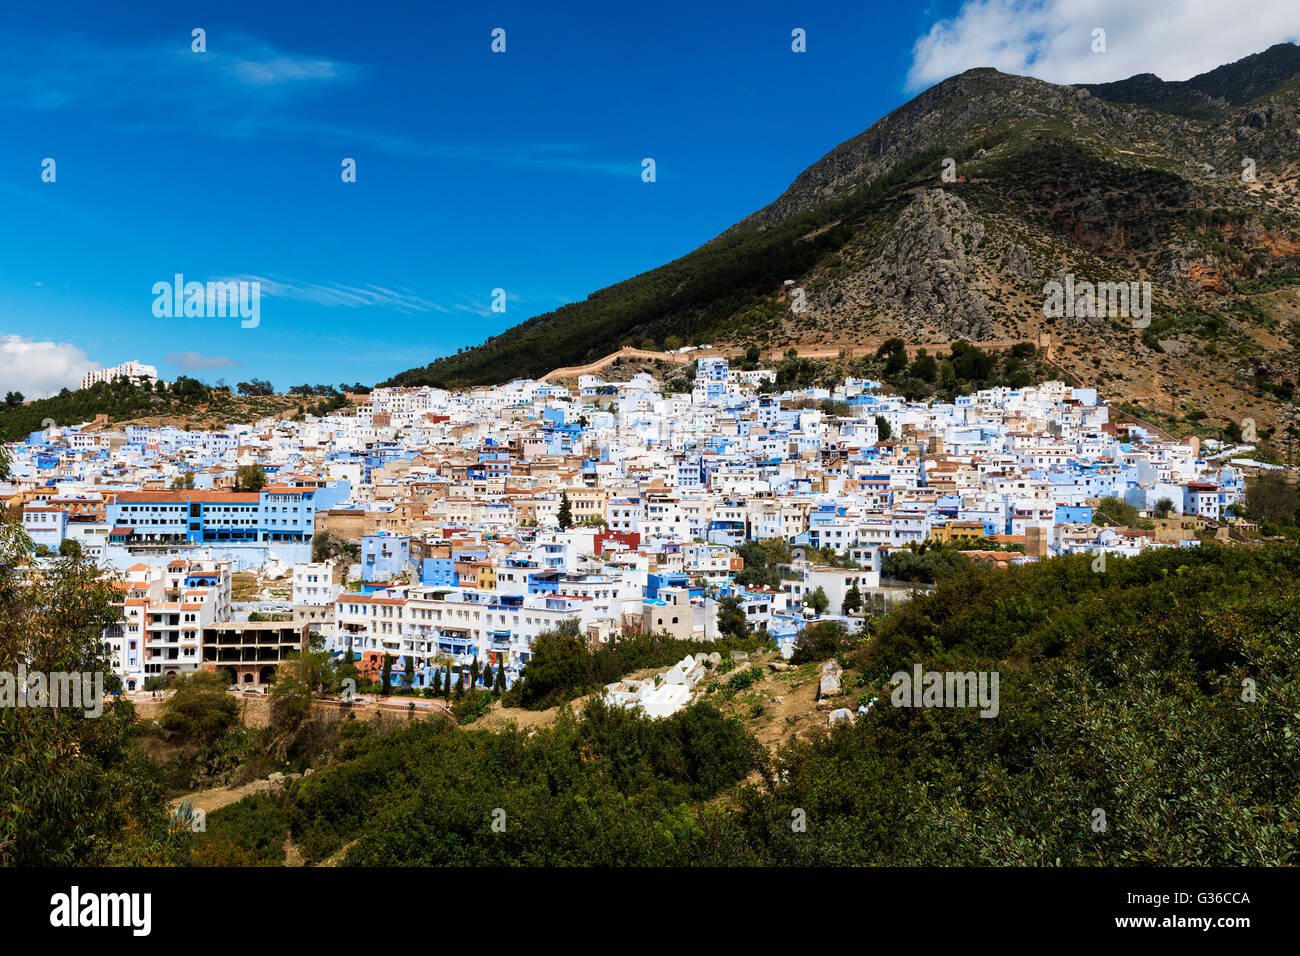 View of the town of Chefchaouen, in Morocco Stock Photo